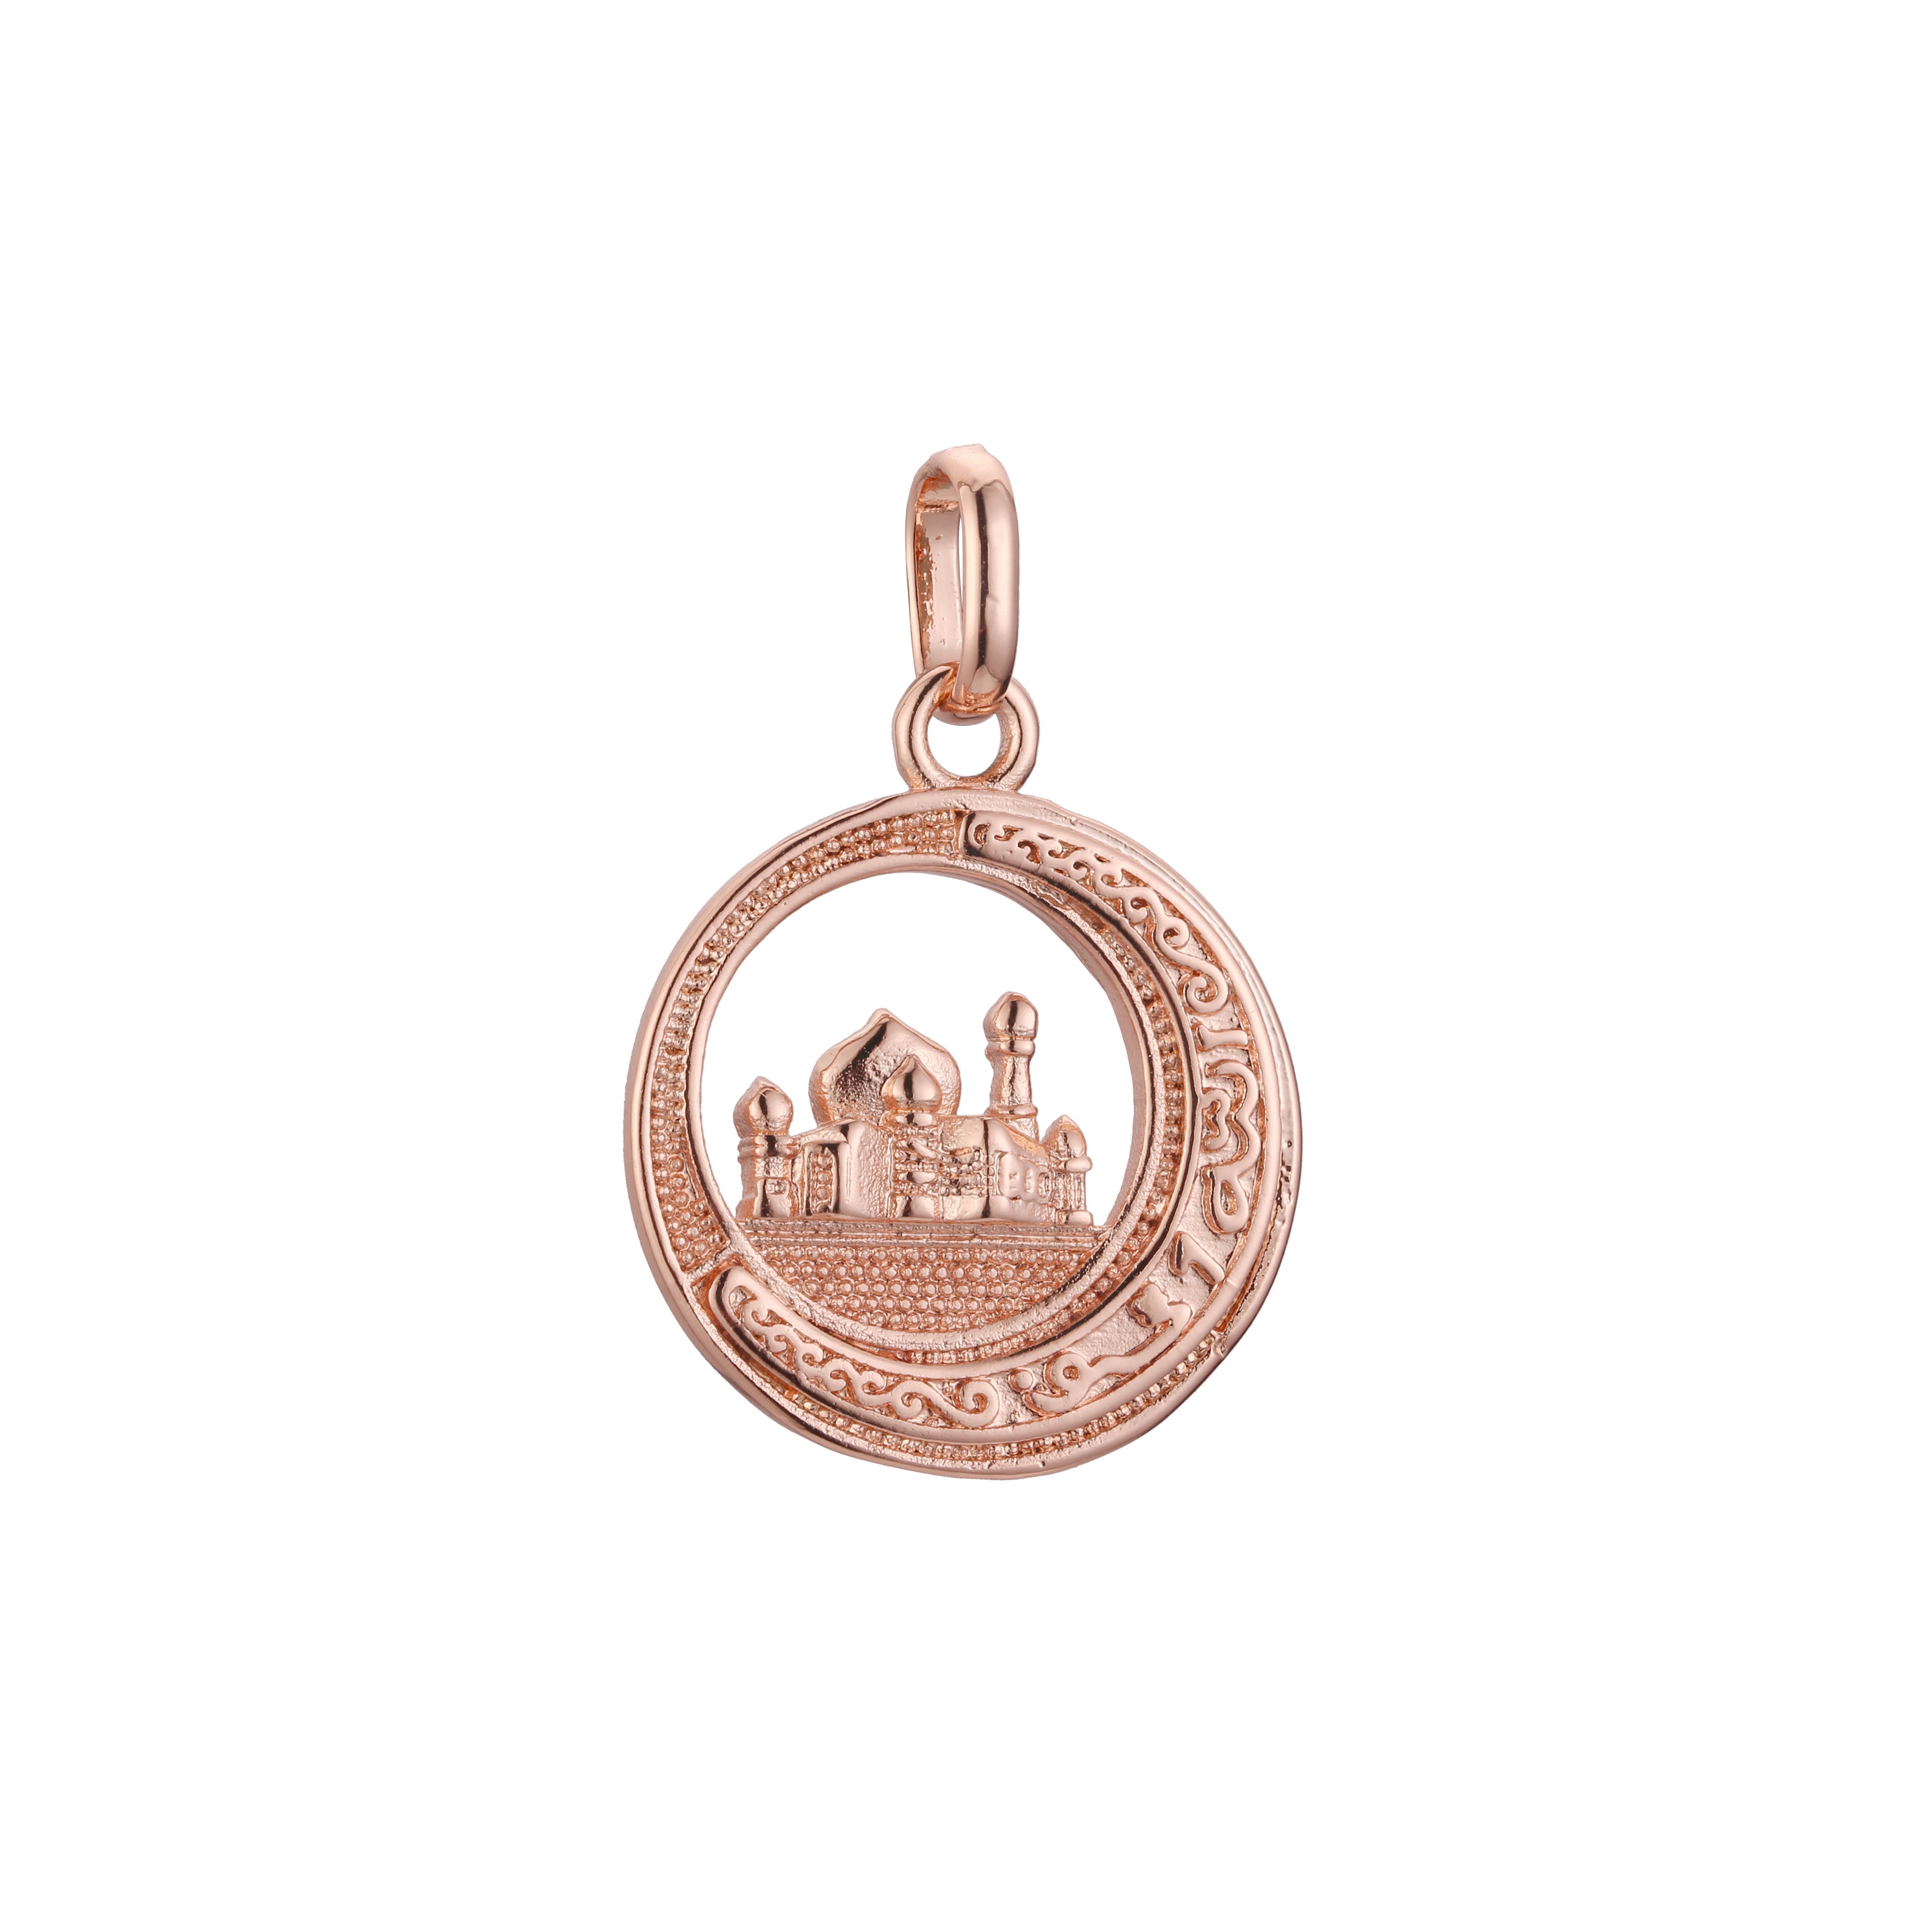 Islamic pendant of the temple in 14K Gold, Rose Gold & White Gold plating colors